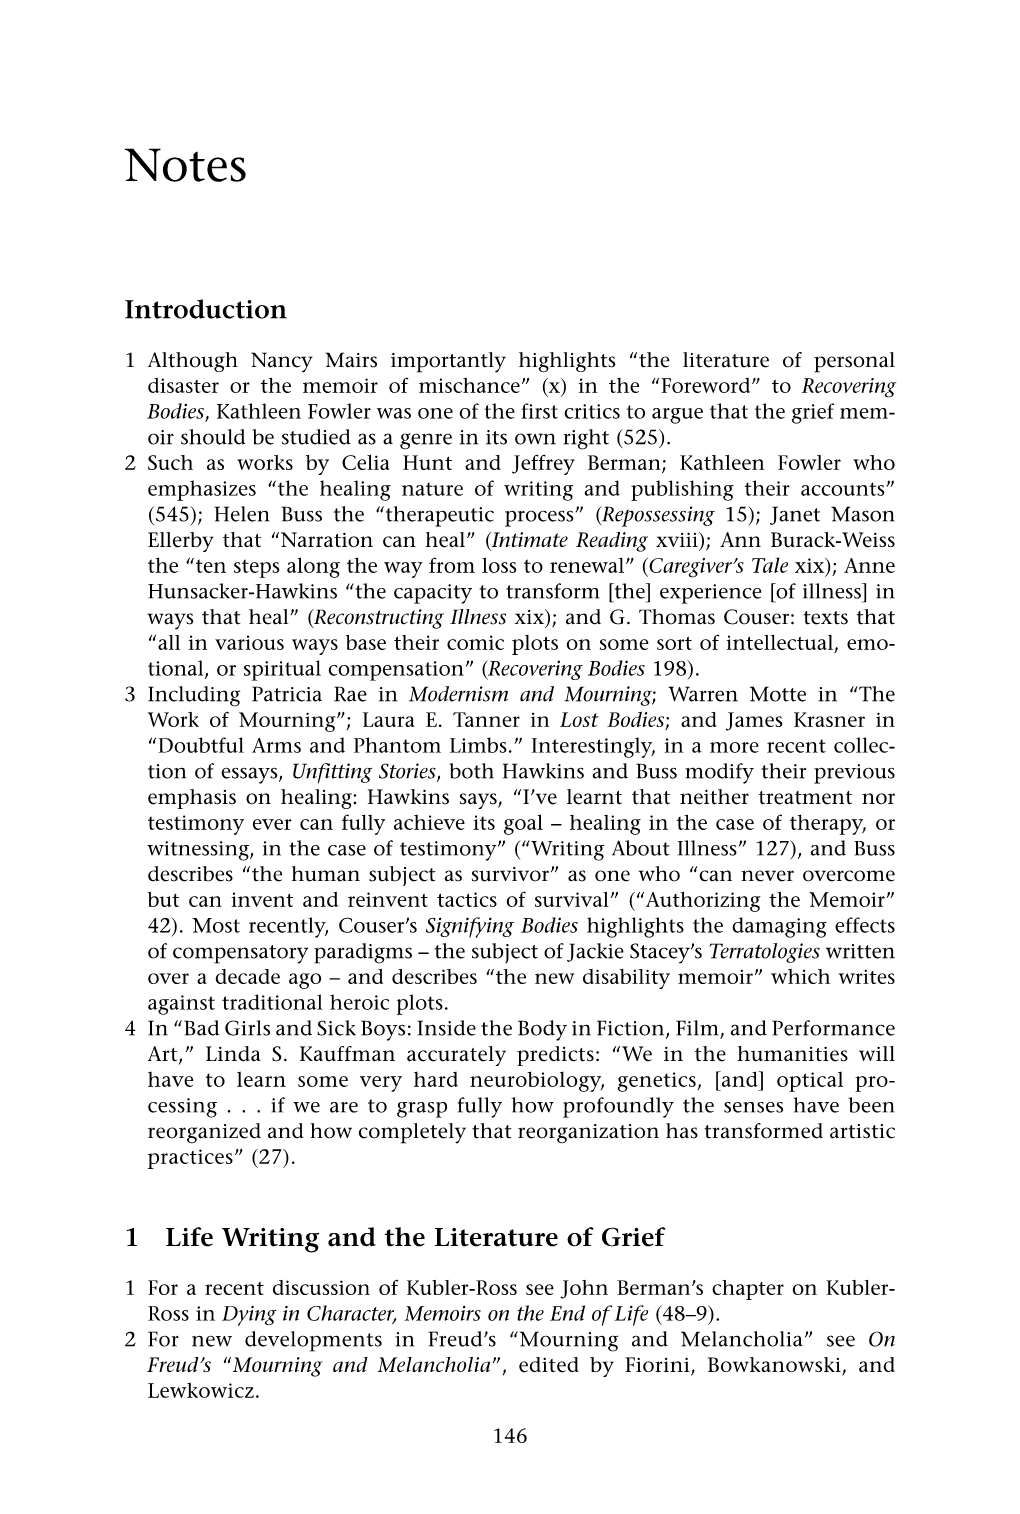 Introduction 1 Life Writing and the Literature of Grief